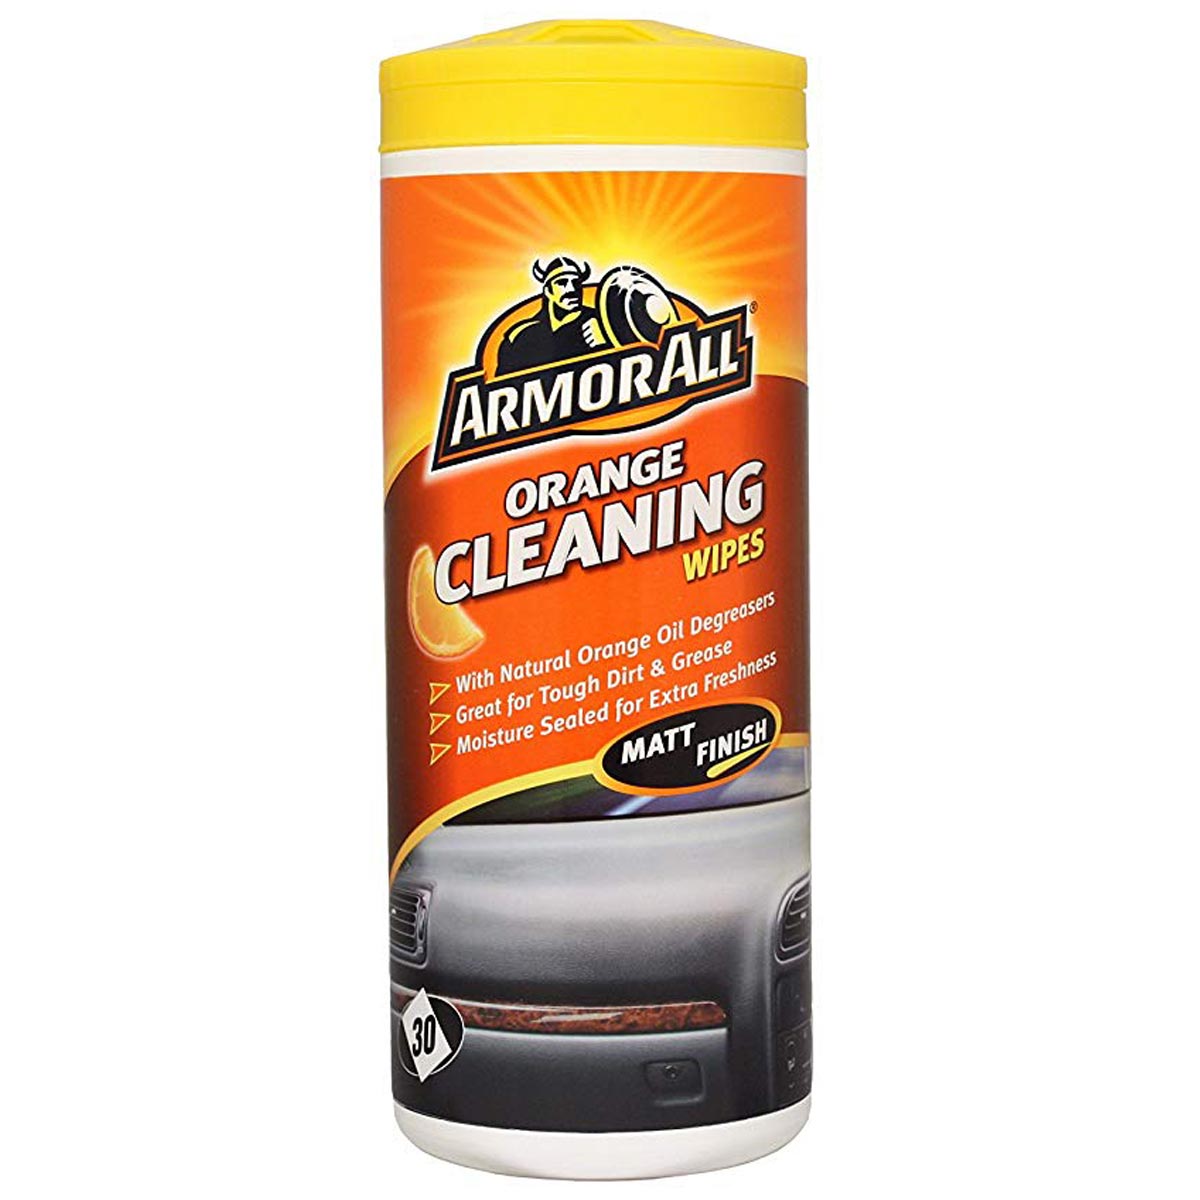 Armor All Orange Cleaning Wipes - 30 Wipes Pack